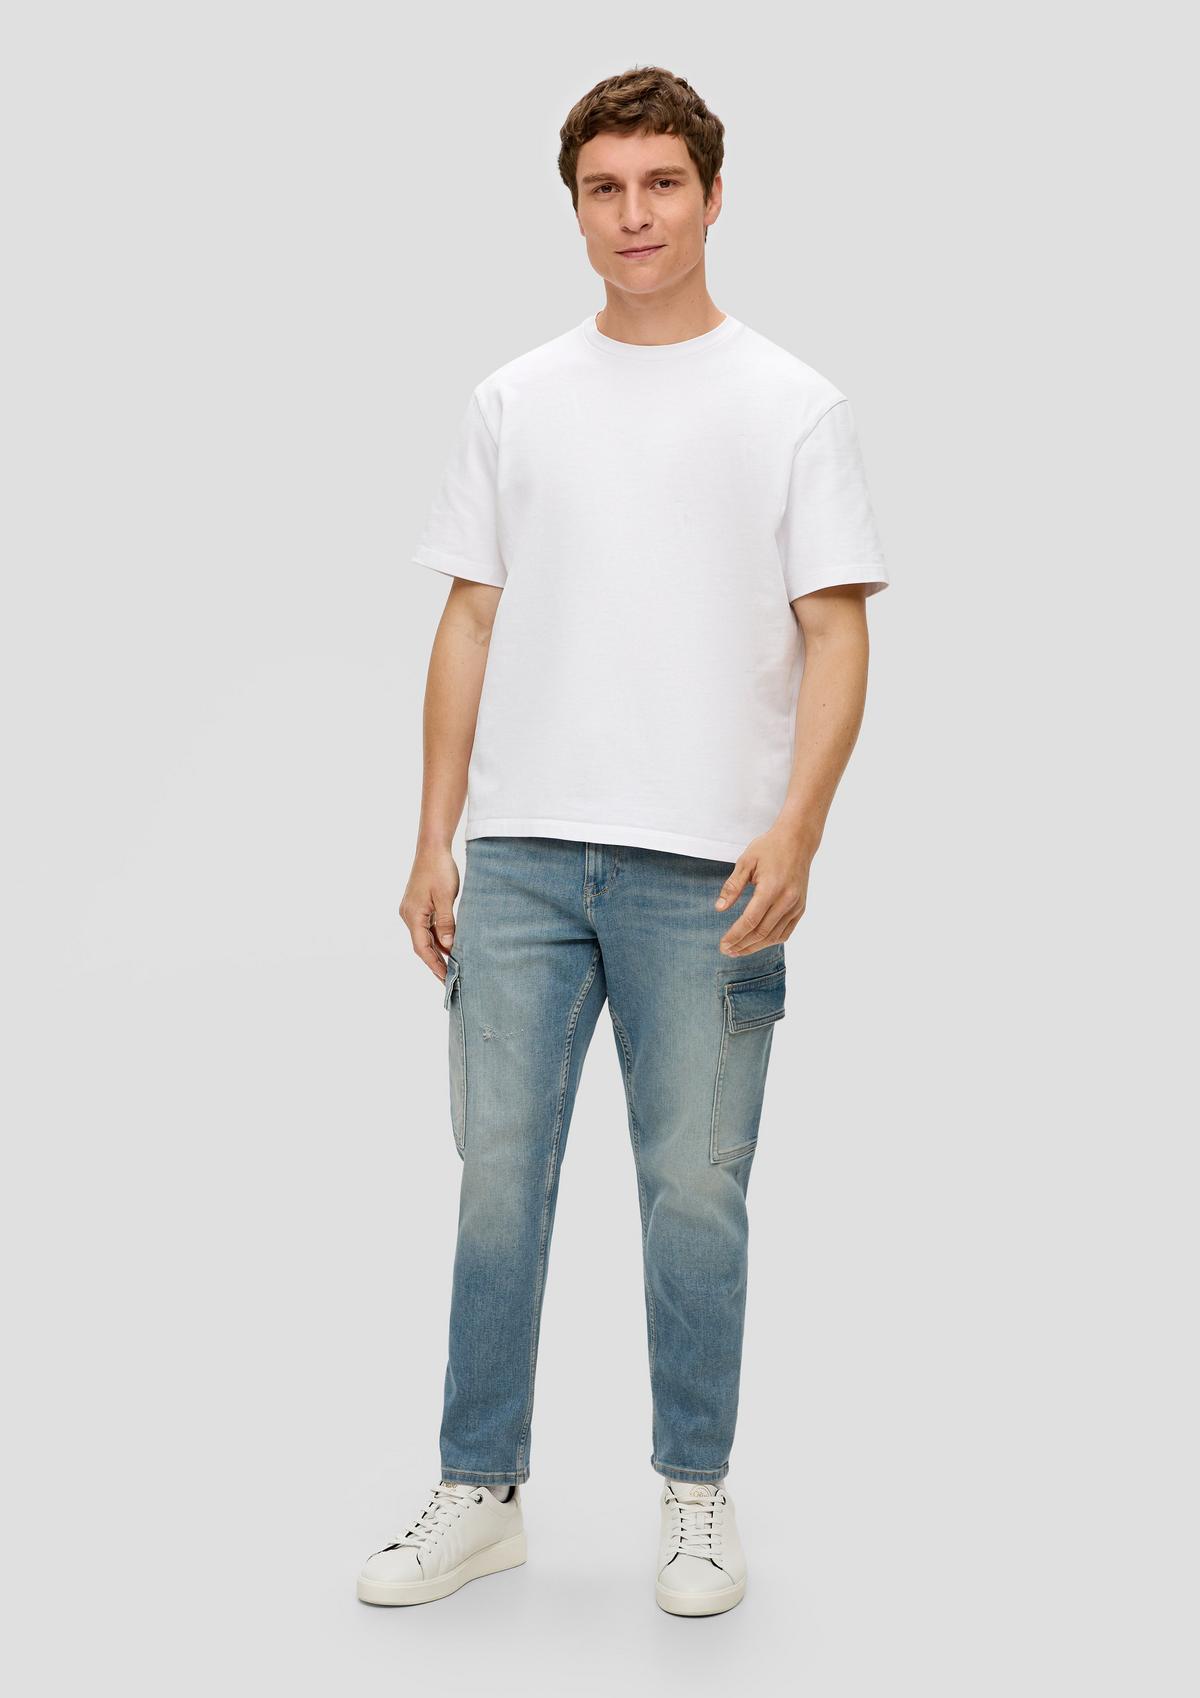 Scube jeans / relaxed fit / high rise / straight leg